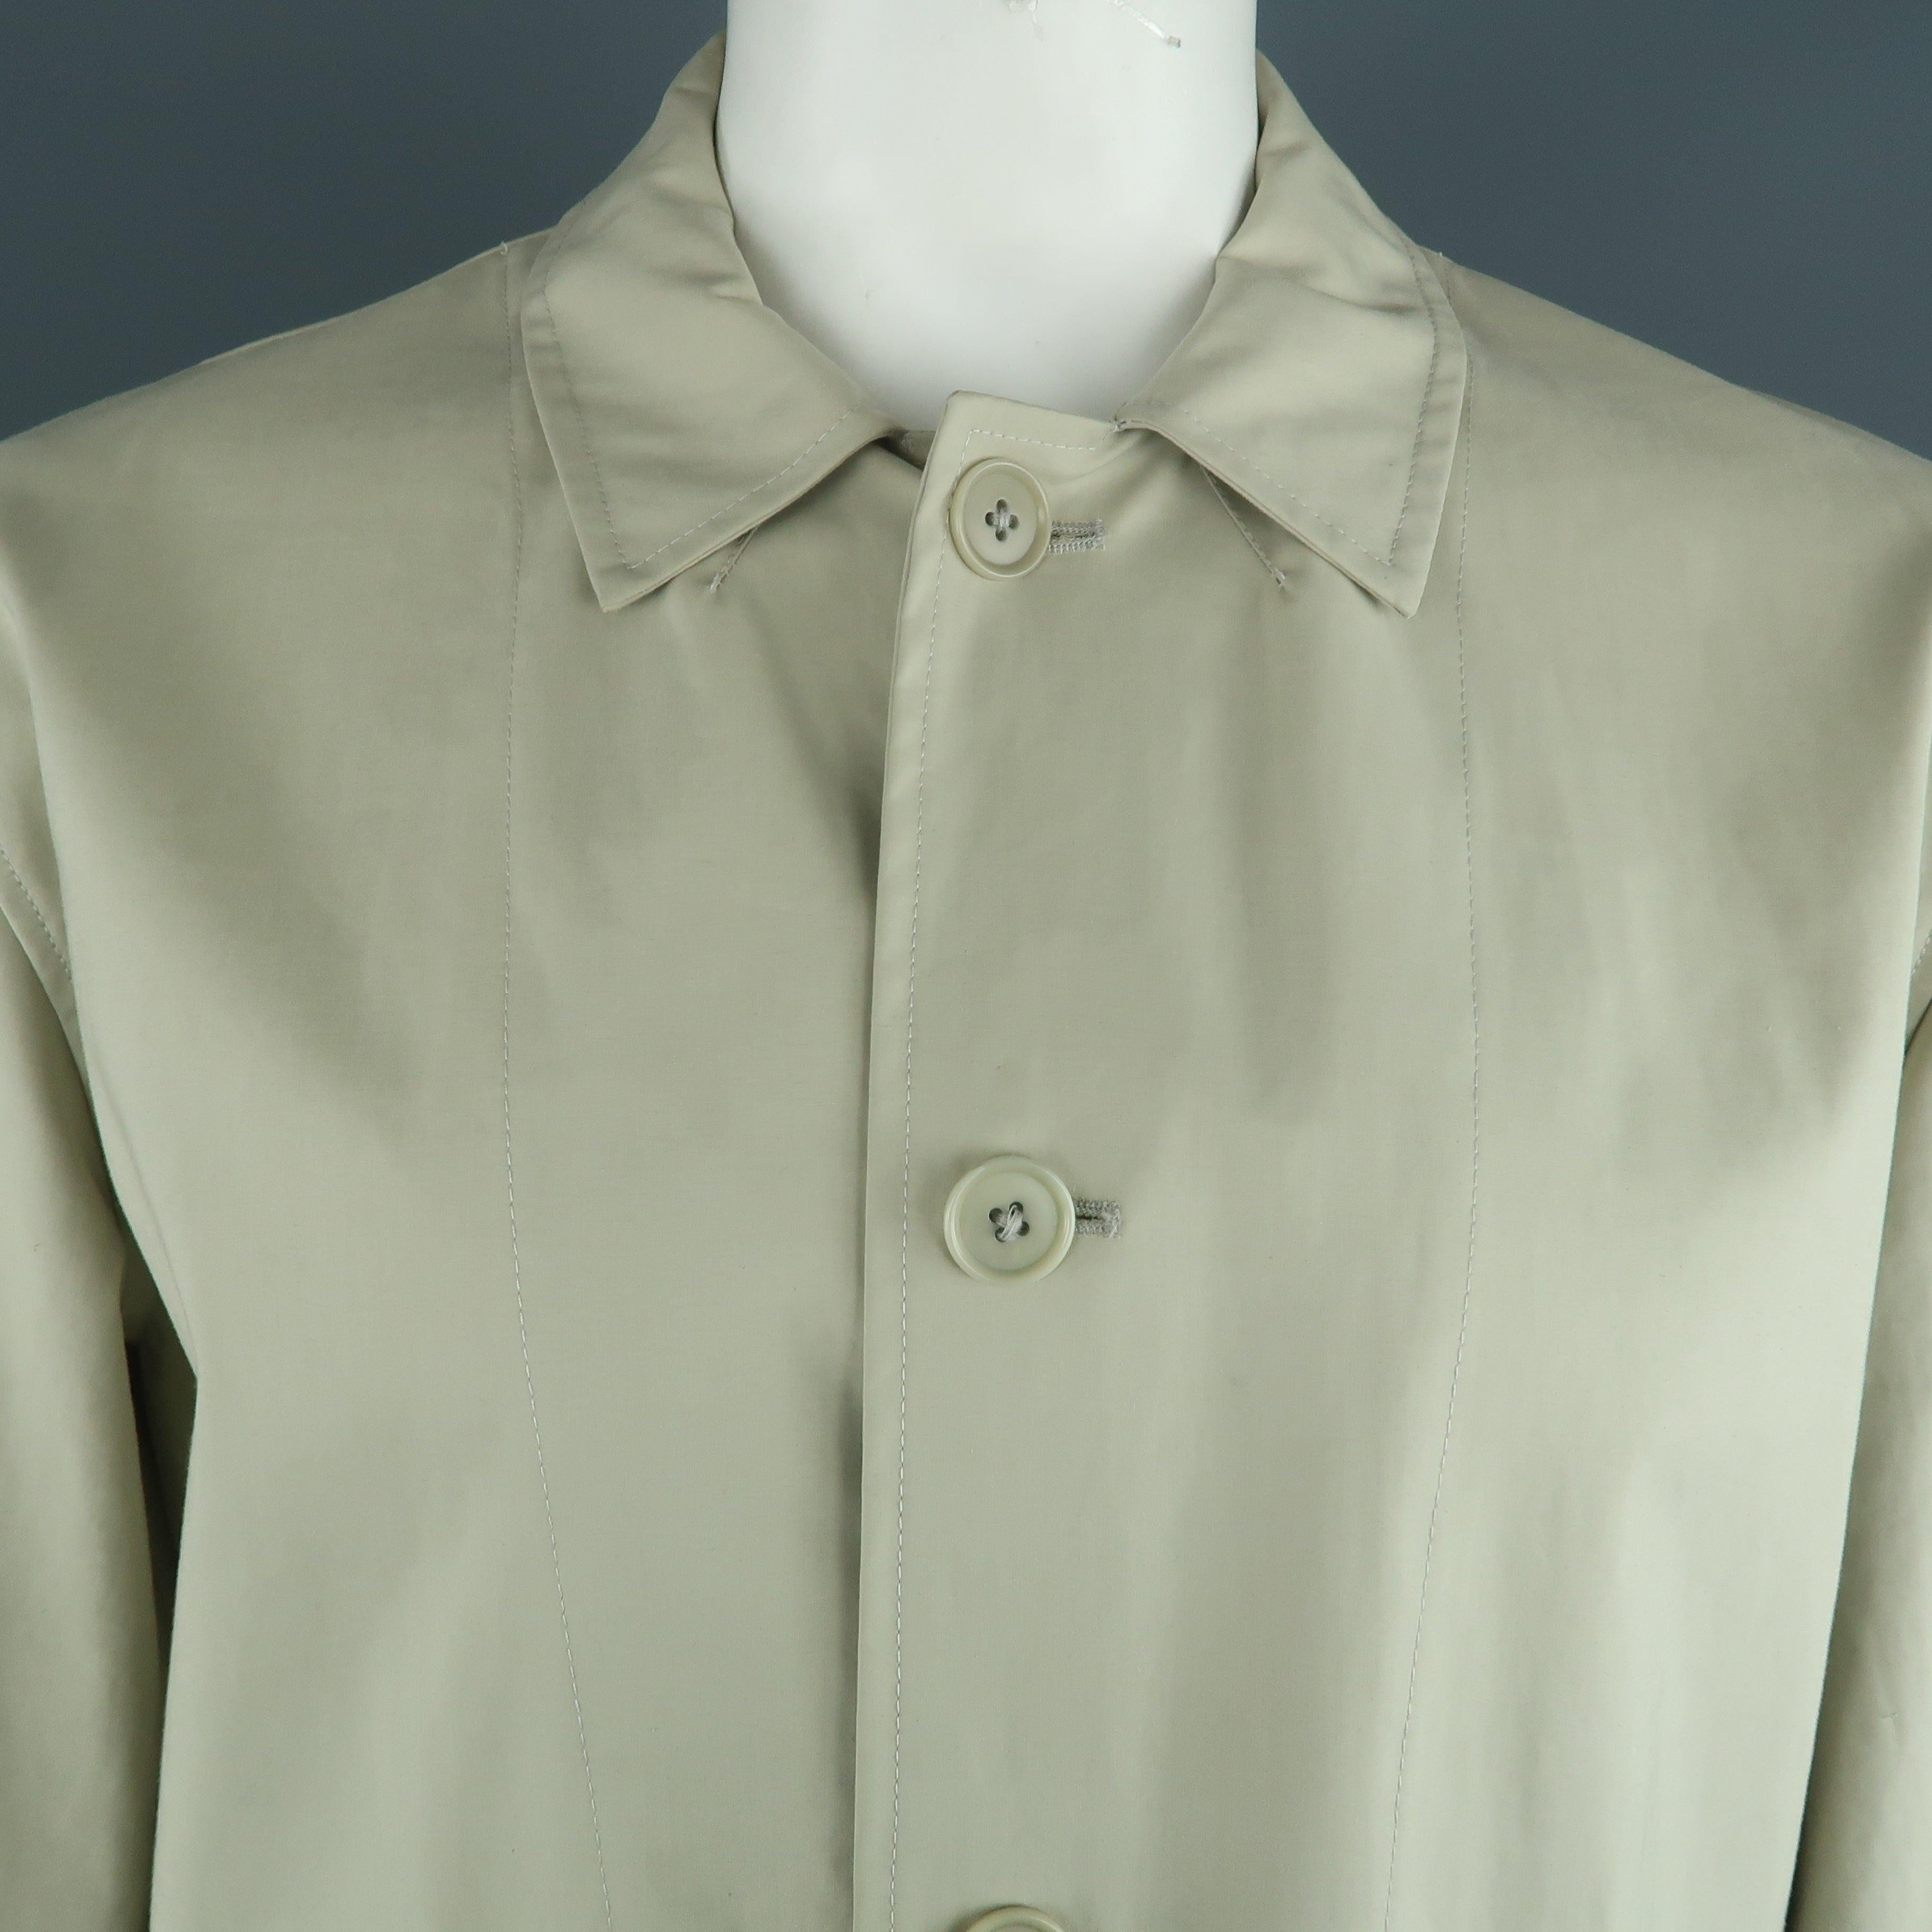 JOHN VARVATOS coat comes in a khaki cotton featuring a belted style and flap pockets. Made in Italy.Very Good Pre-Owned Condition. 

Marked:   XL 

Measurements: 
 
Shoulder: 20.5 inches  Chest: 48 inches  Sleeve: 25 inches  Length: 30 inches   
  
